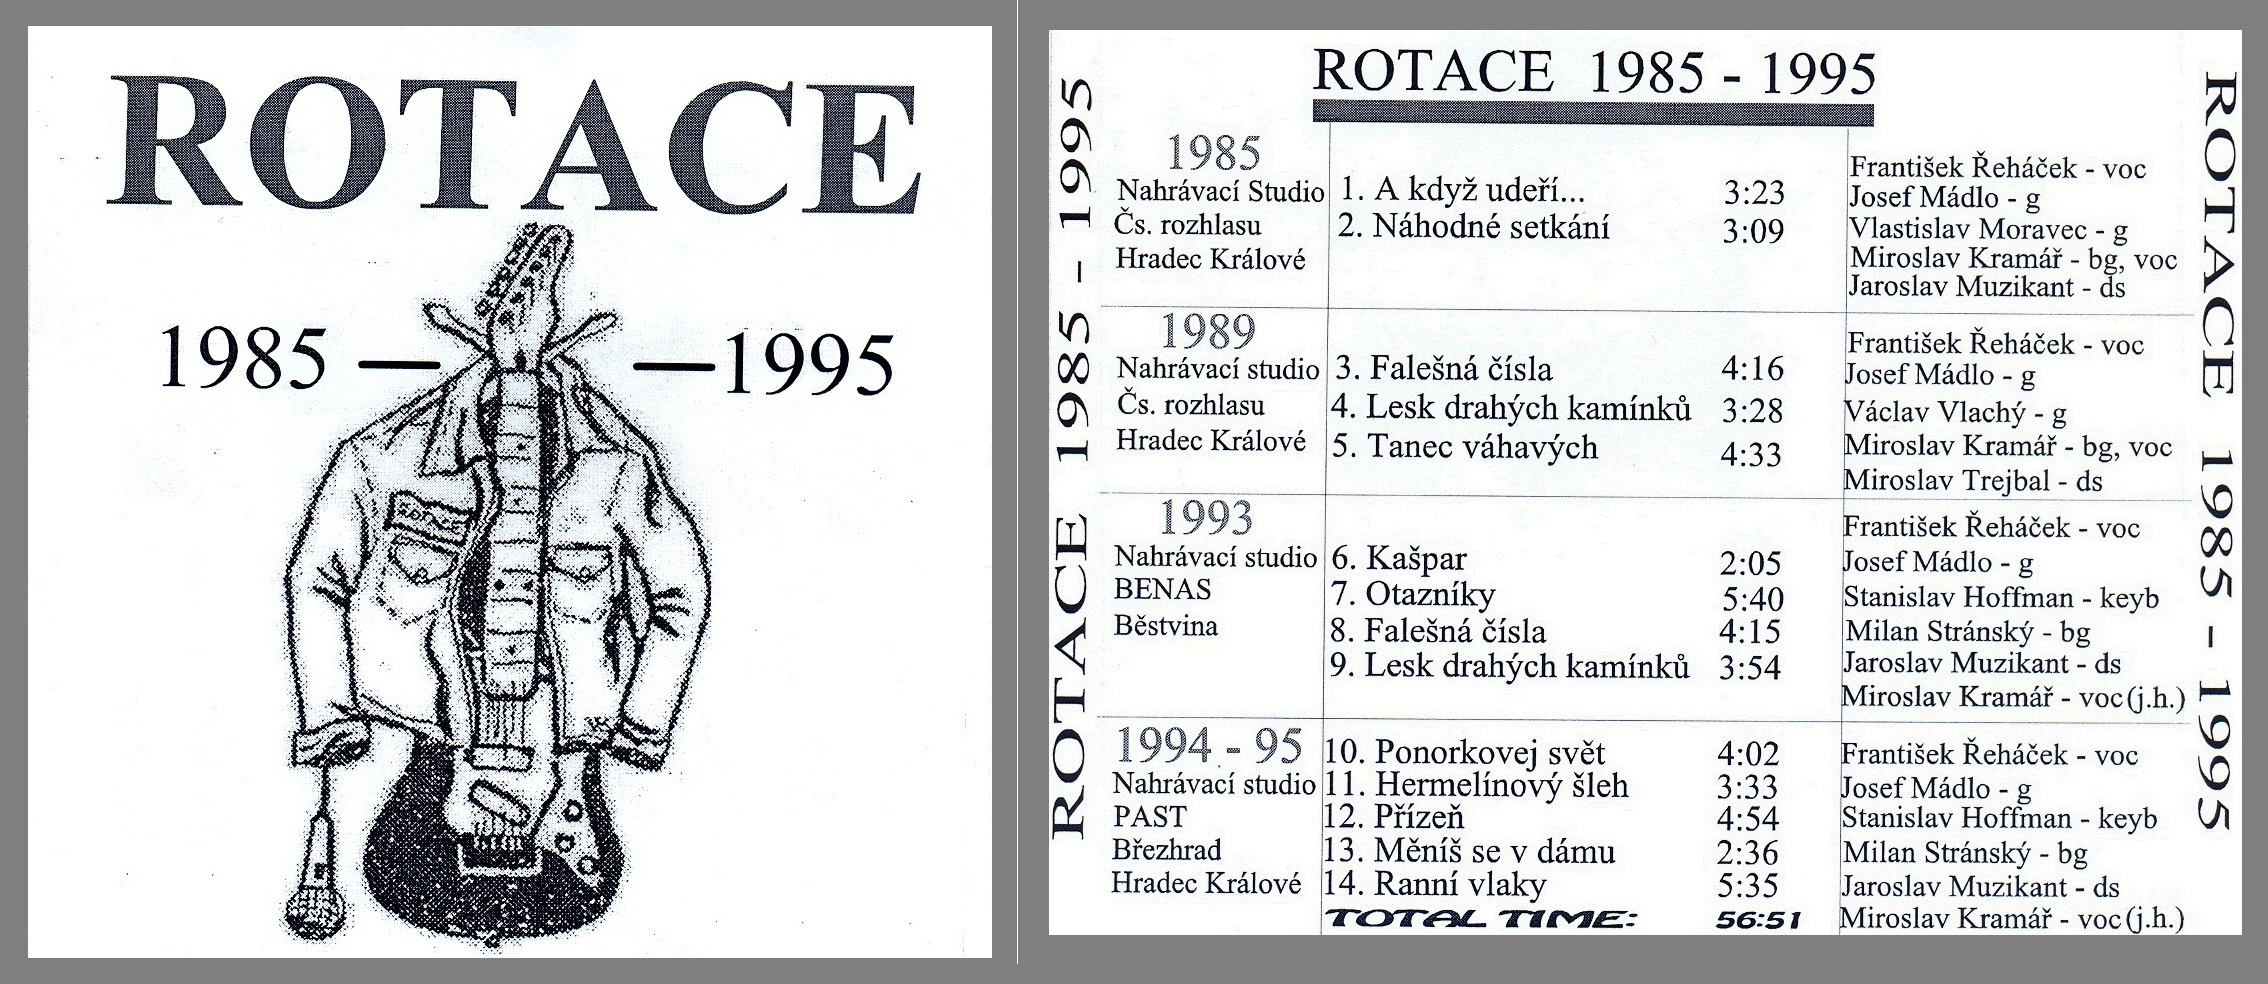 CD Rotace 1985 - 1995 (front)